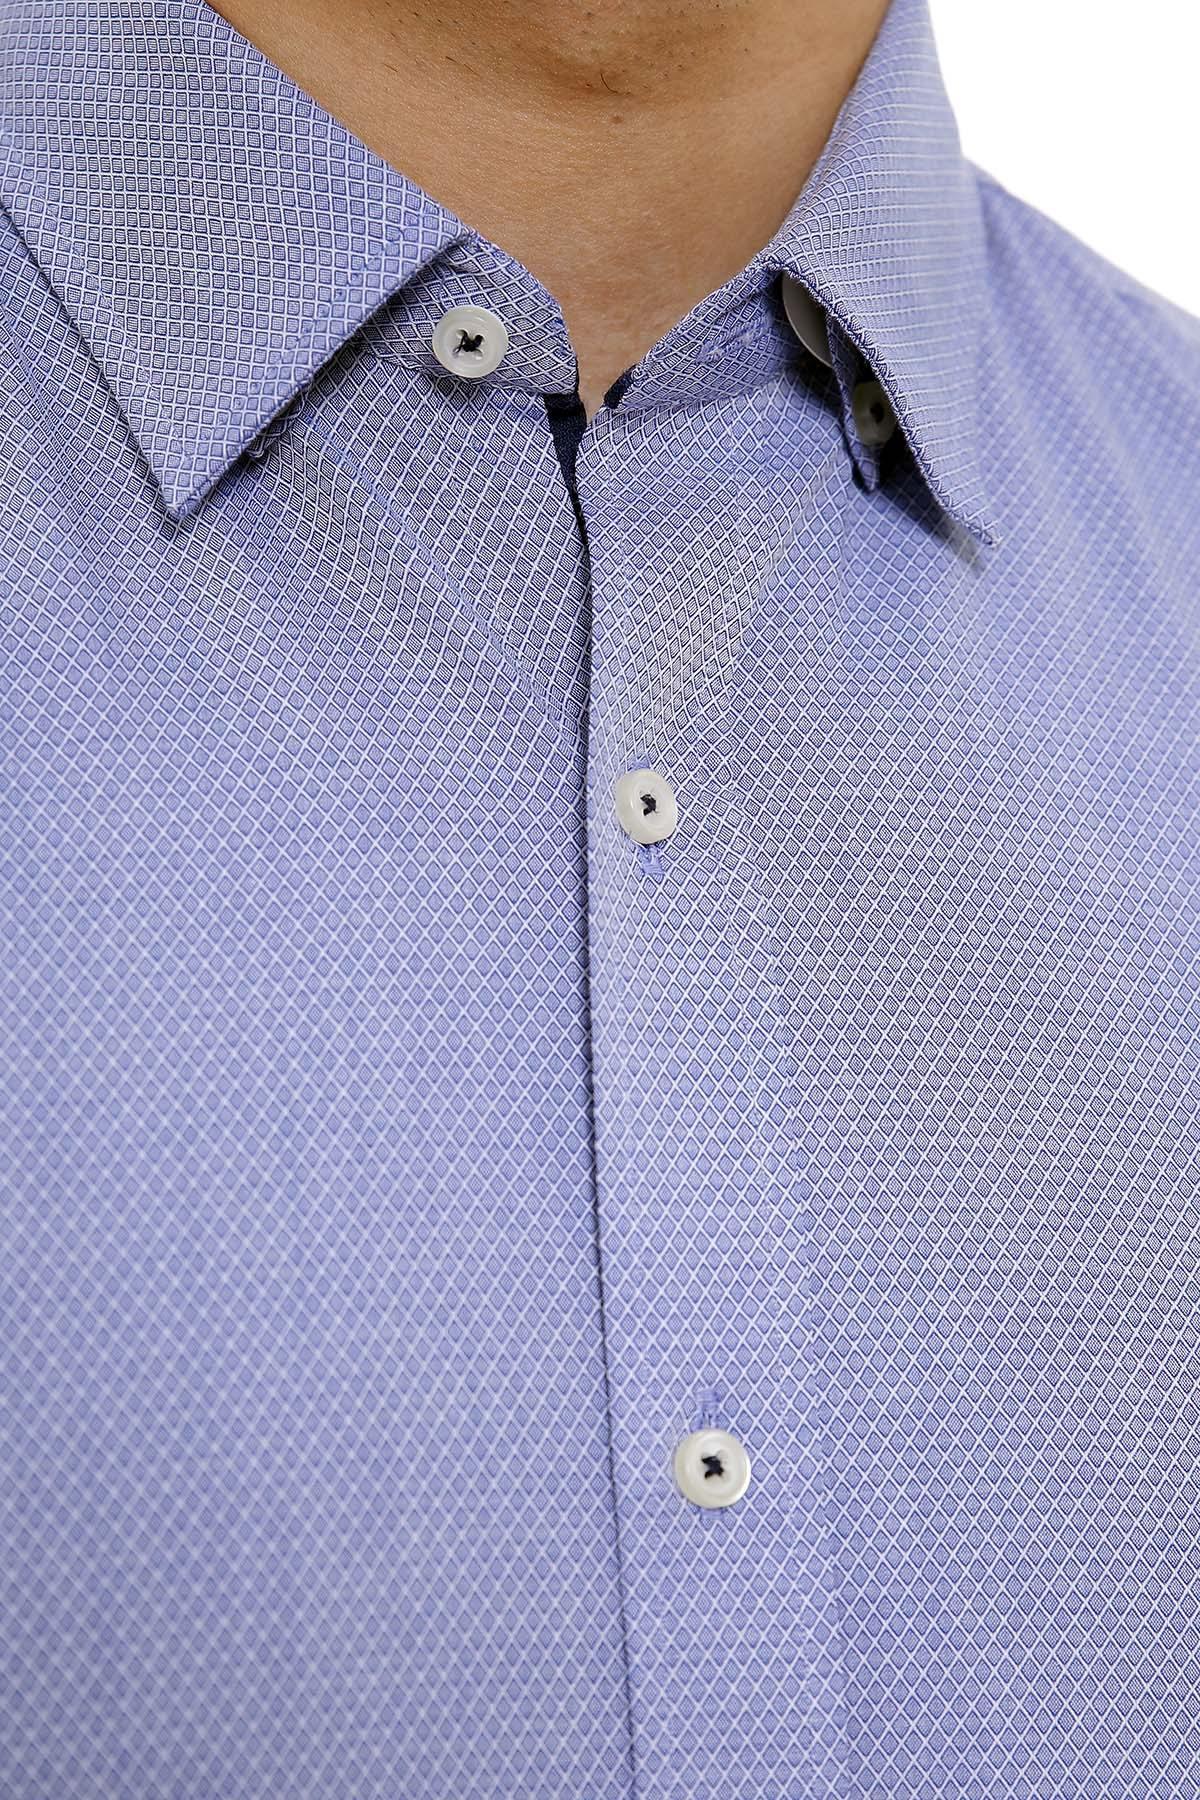 SMART SHIRTS BUTTON DOWN FULL SLEEVE SKY BLUE at Charcoal Clothing